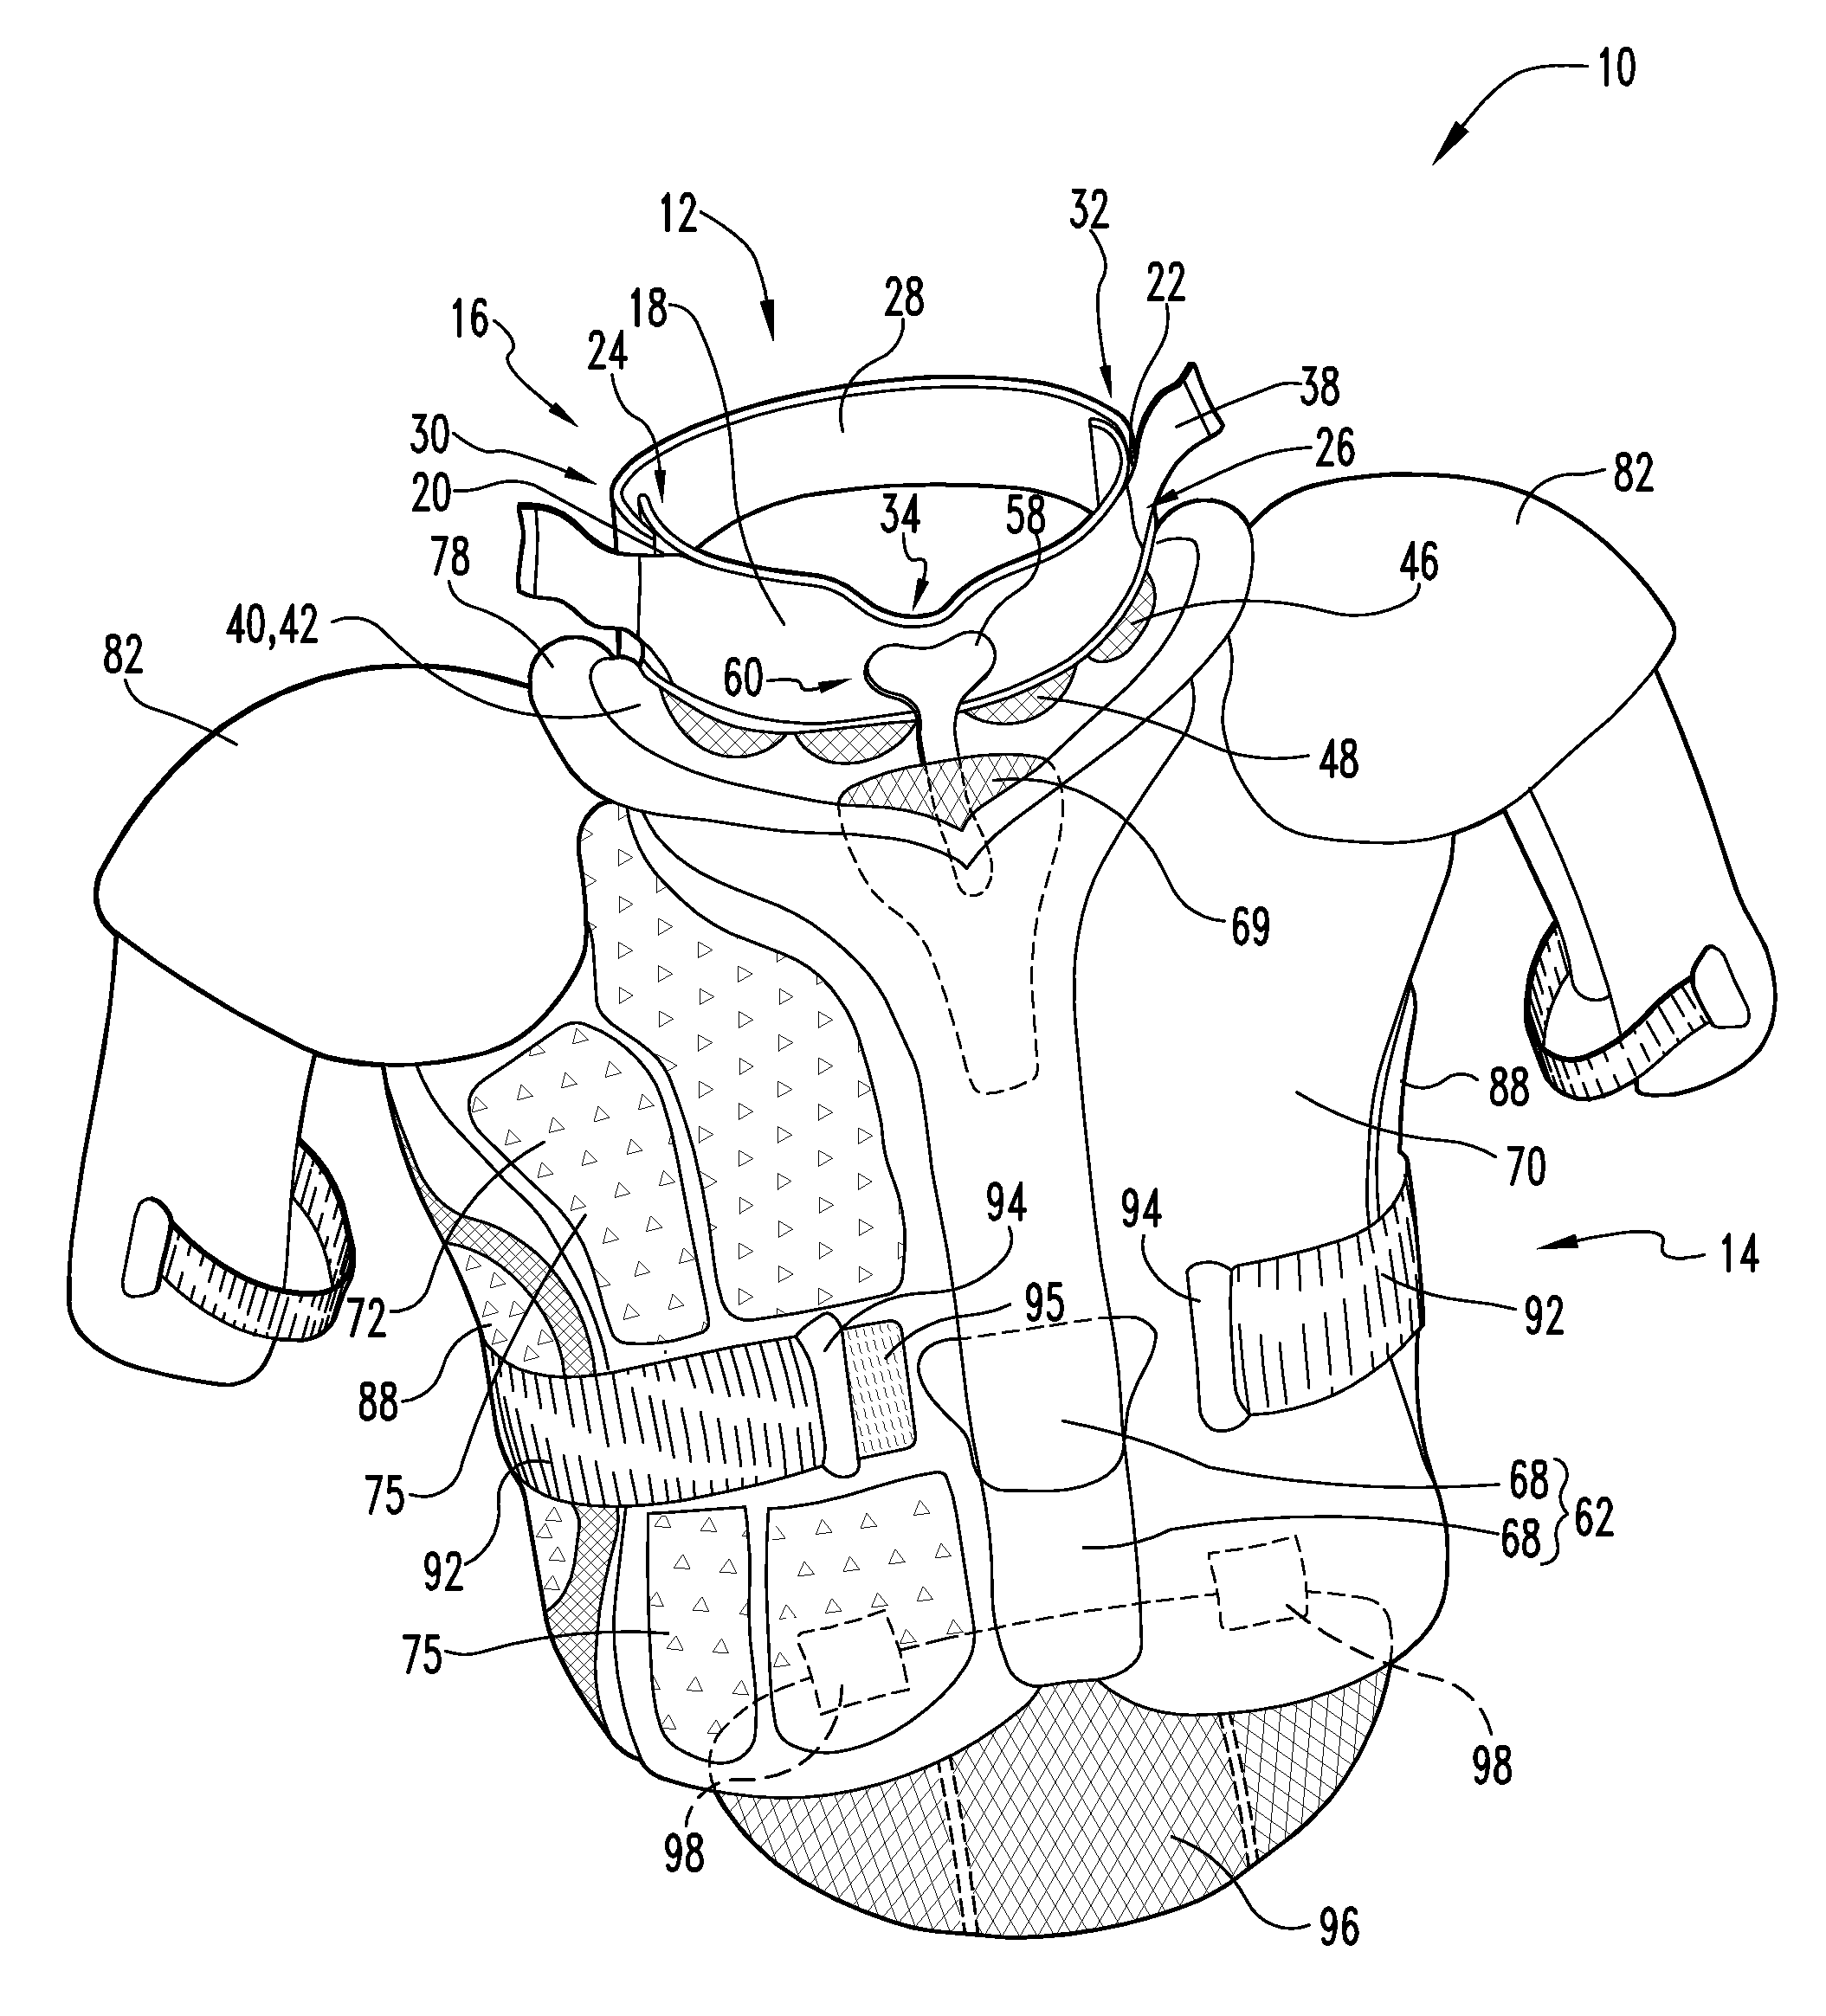 Combined neck and upper body protective garment